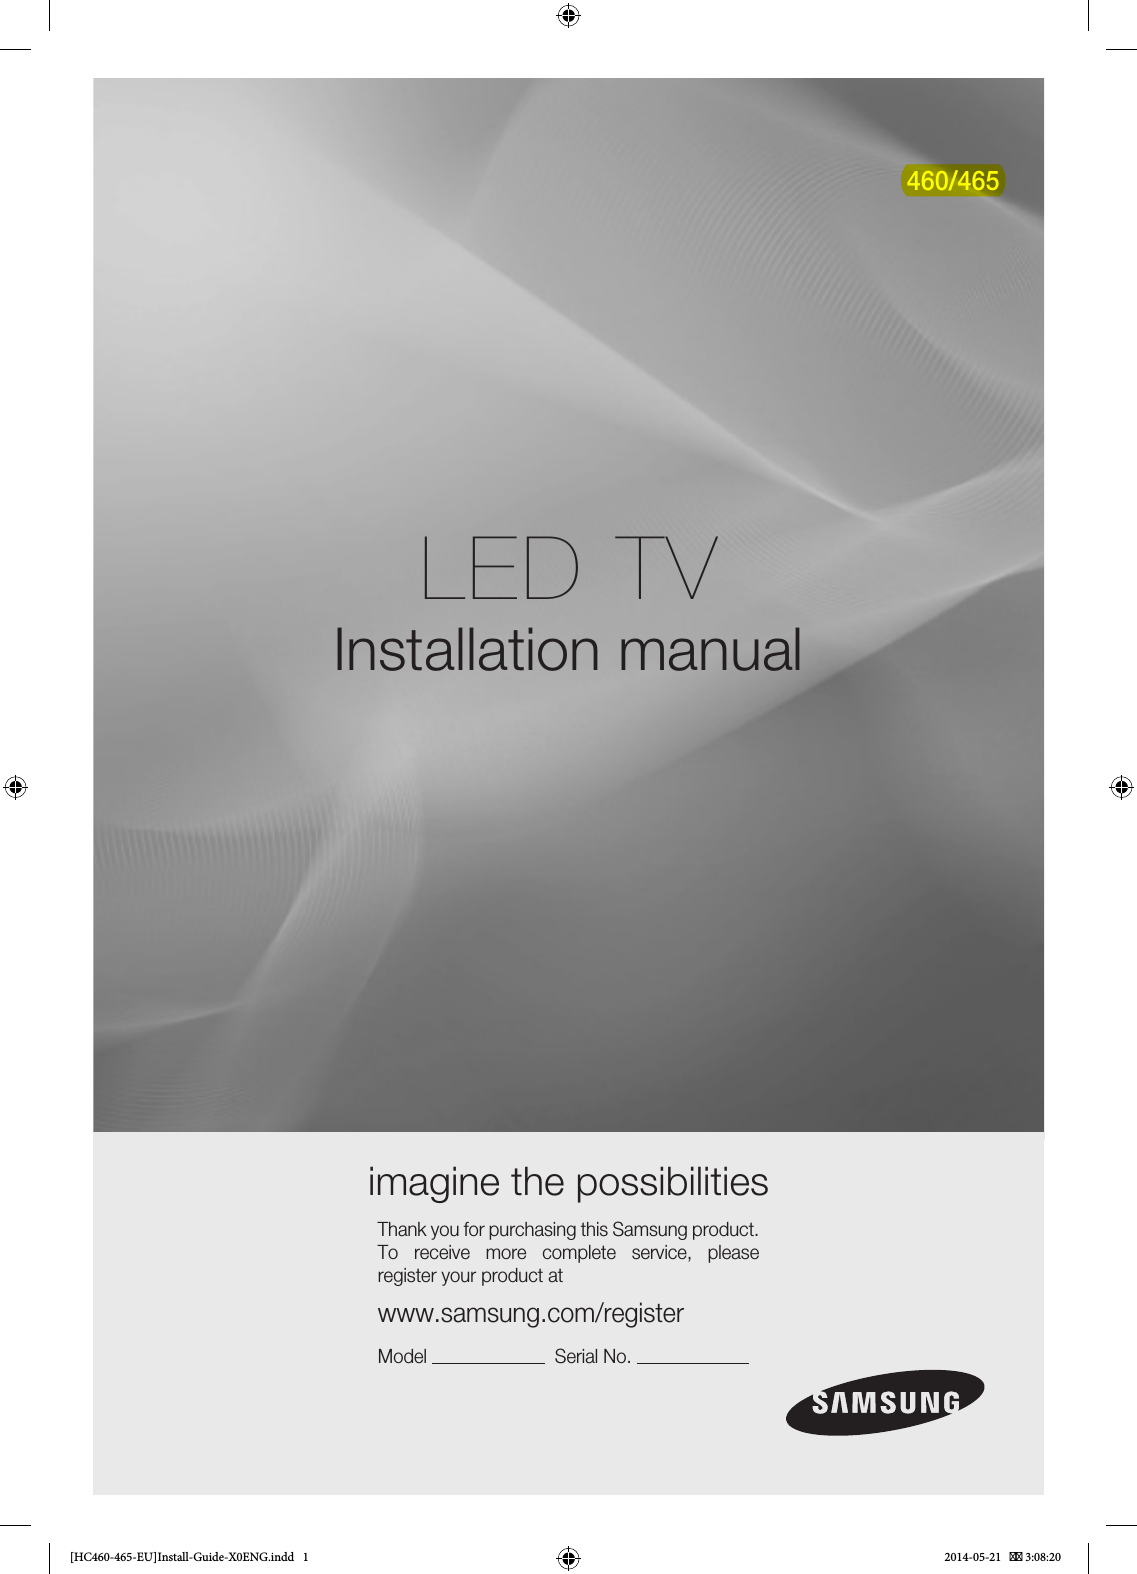 LED TVInstallation manual imagine the possibilitiesThank you for purchasing this Samsung product. To receive more complete service, please register your product atwww.samsung.com/registerModel                         Serial No.                       460/465[HC460-465-EU]Install-Guide-X0ENG.indd   1 2014-05-21    3:08:20